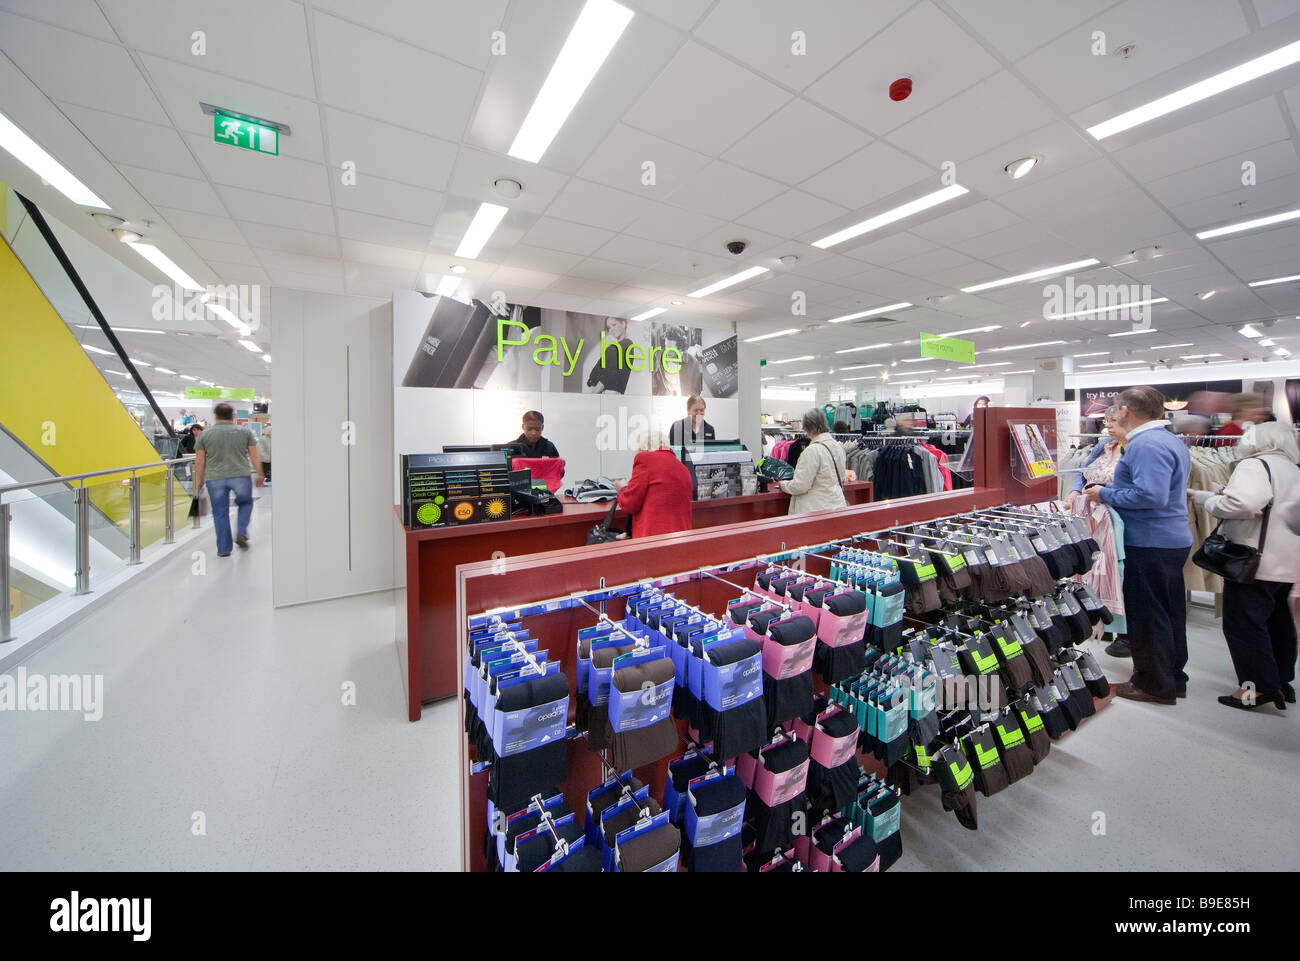 Marks and Spencer shop interior Stock Photo